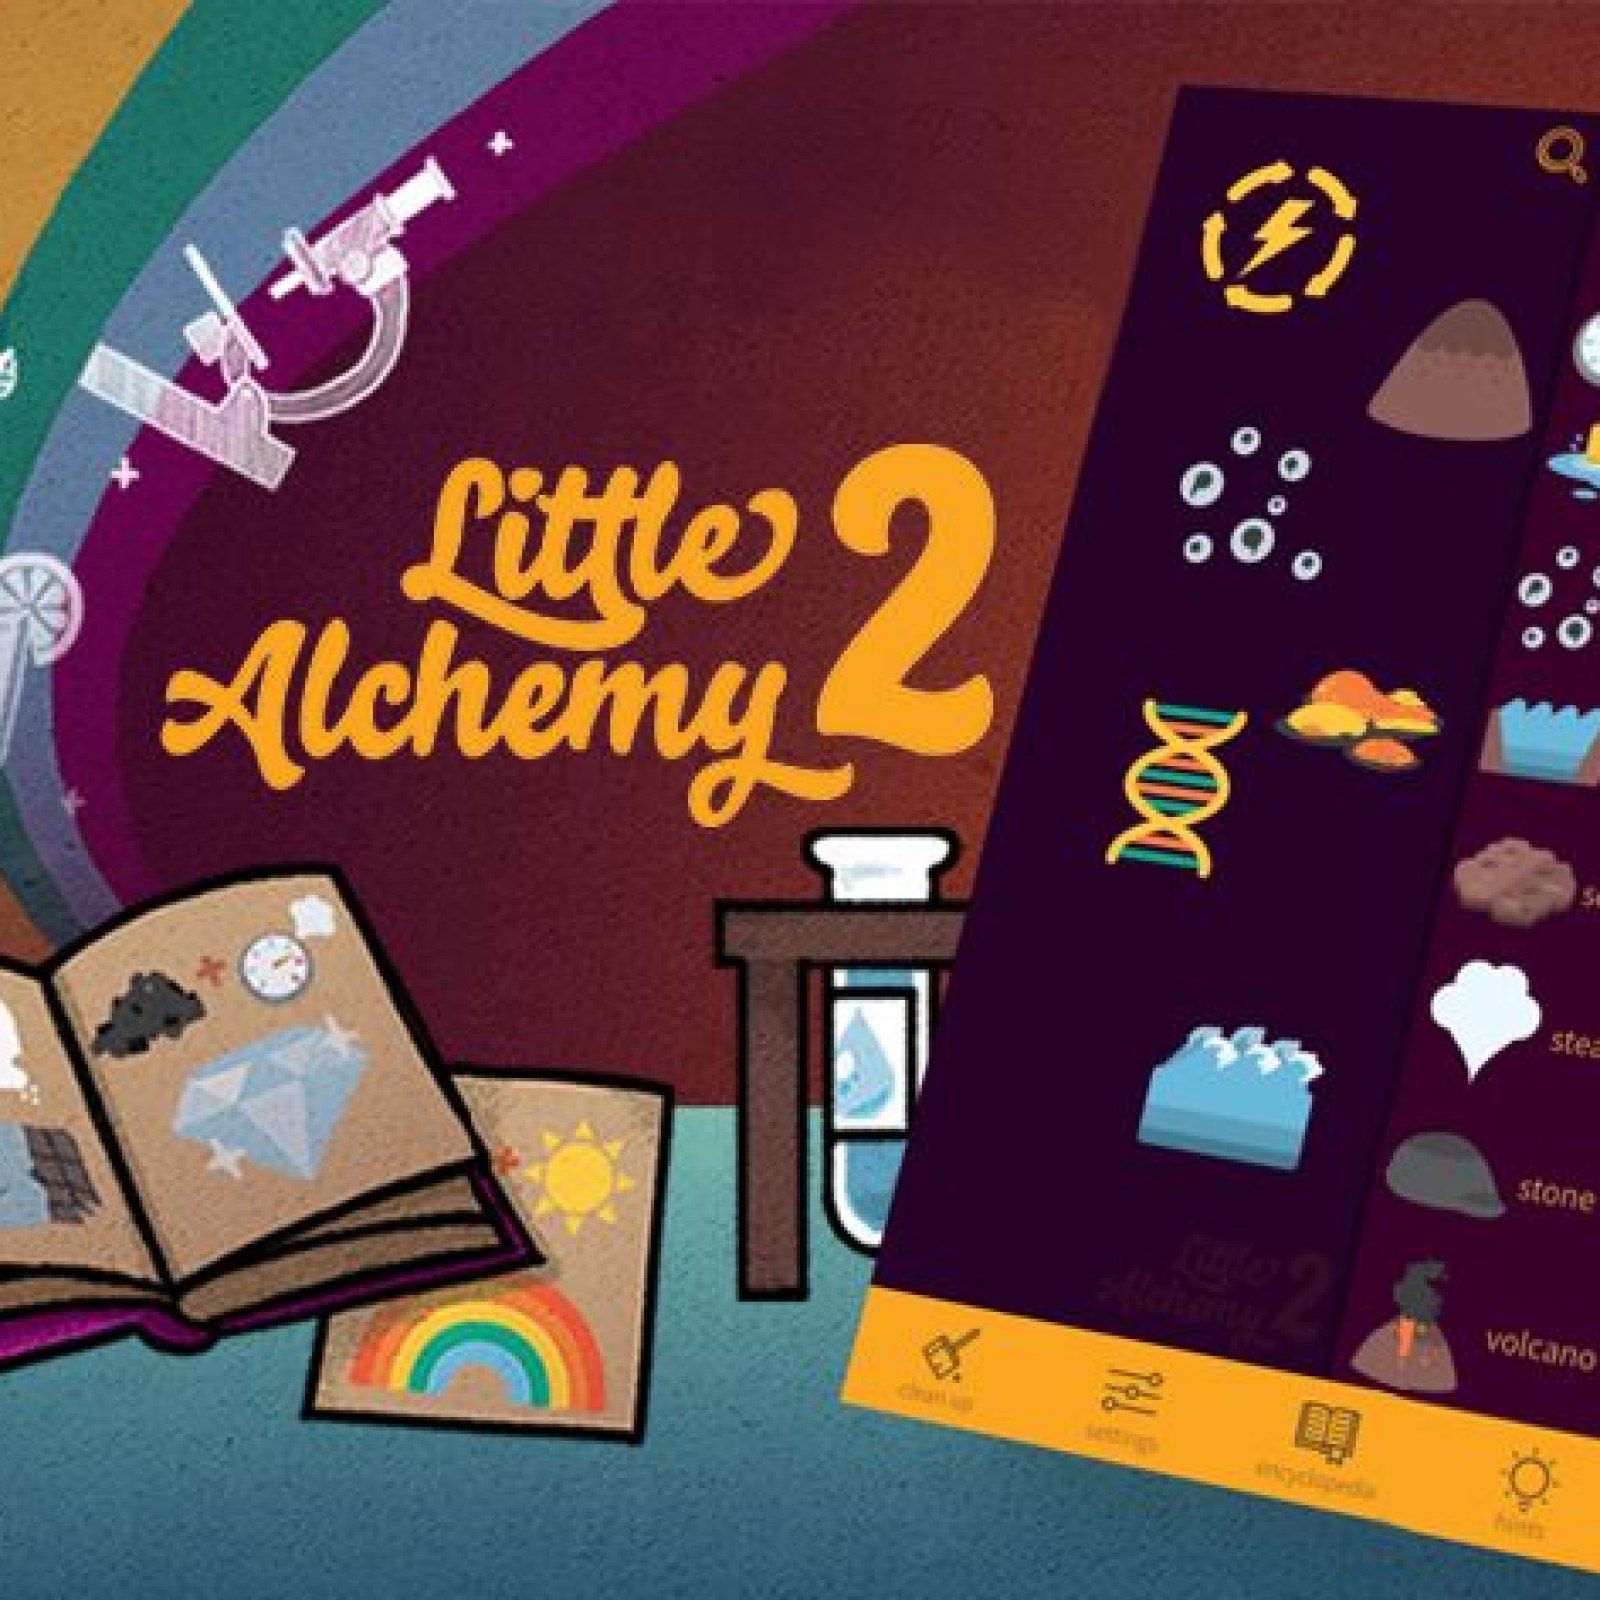 Little Alchemy 2 Quietly Releases, Bringing Major Gameplay And